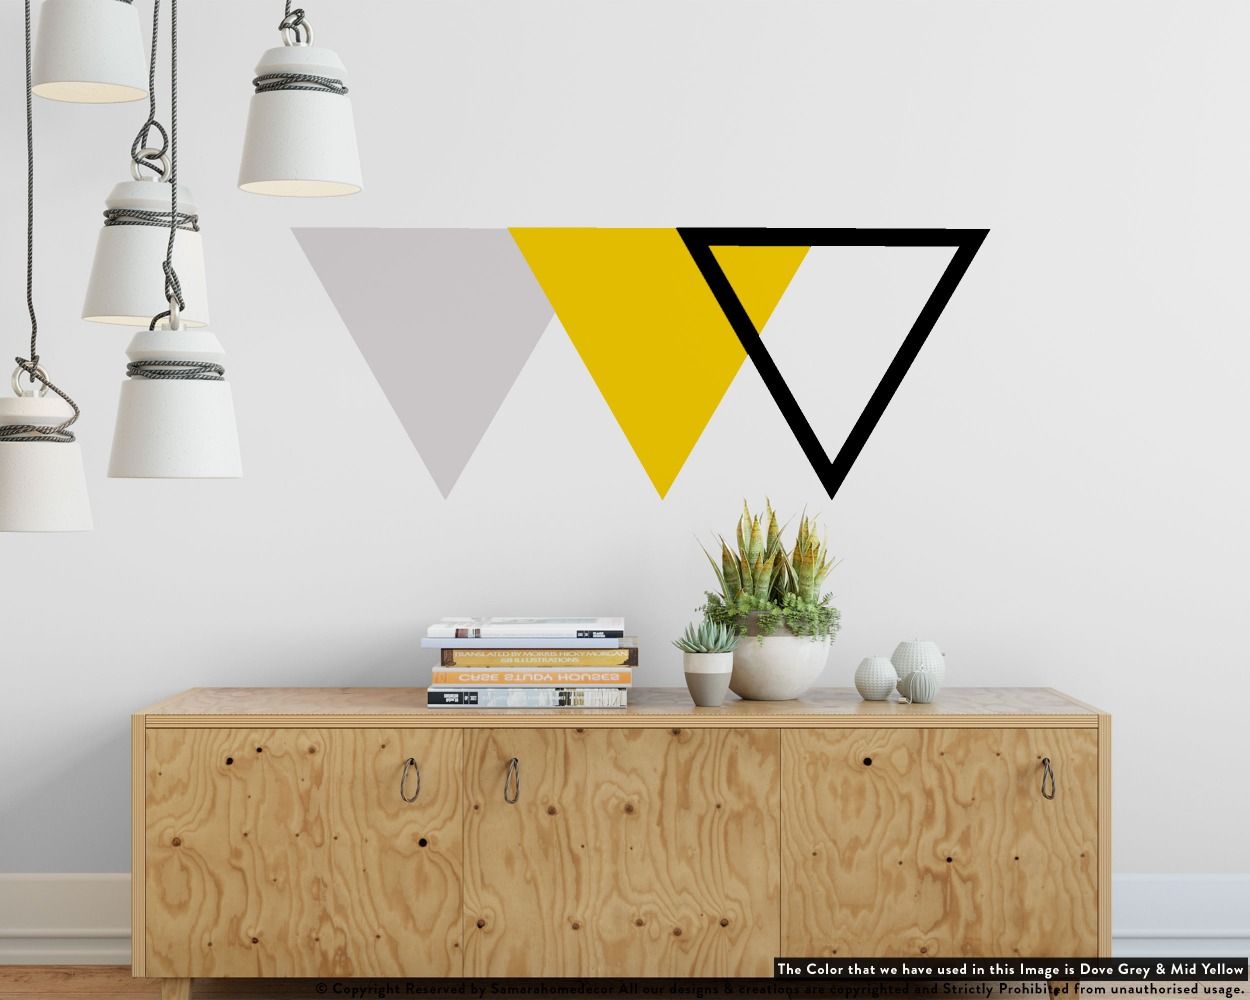 Cute and best abstract Triangles Pattern Wall Decal Boho vinyl Wall decals